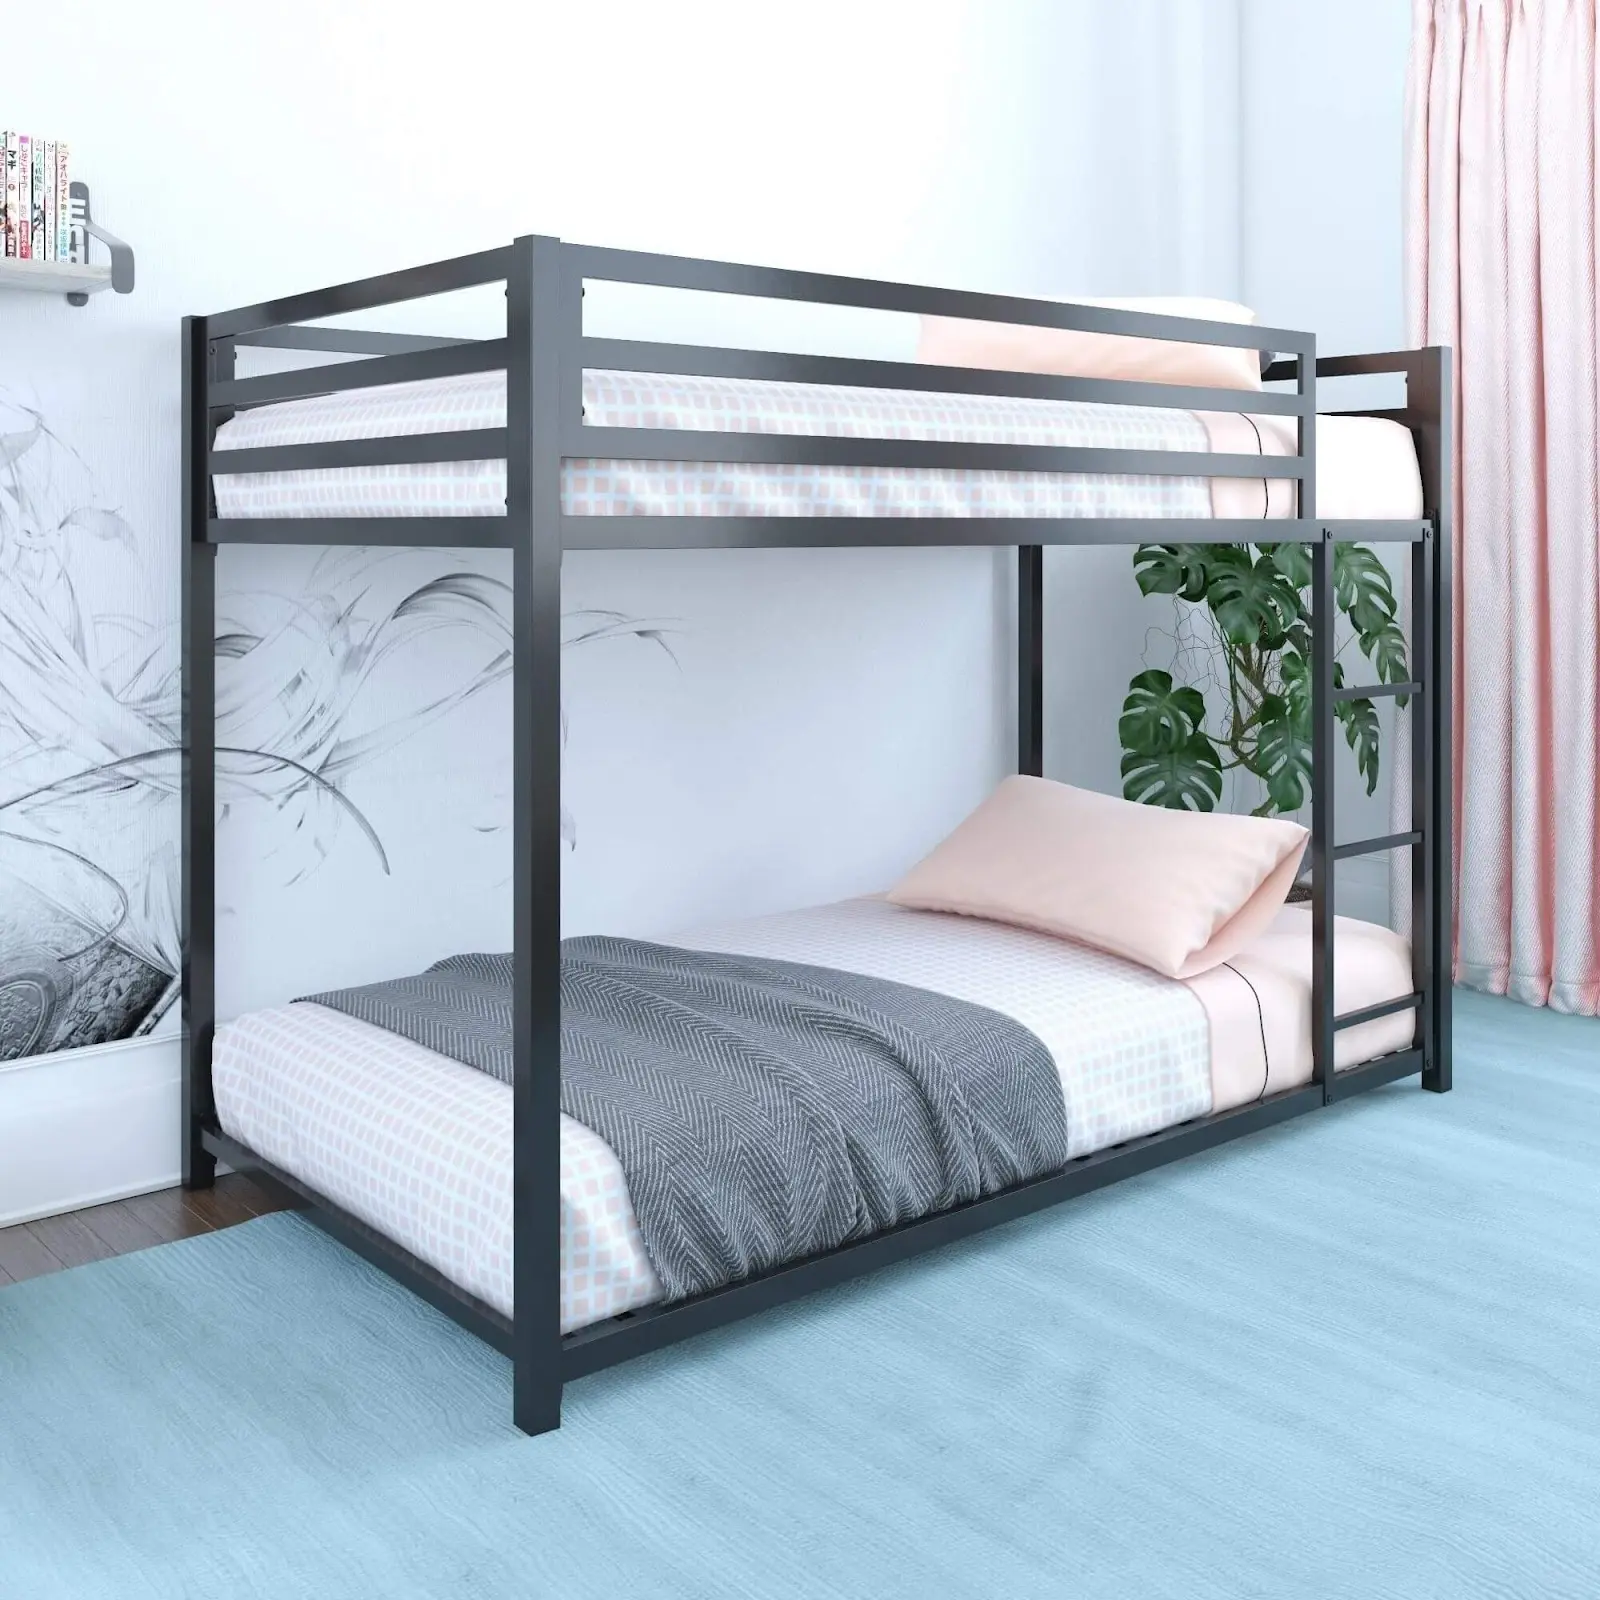 Cheap Bunk Metal Bed Frame diassembly square pipe double-layer beds customized for bedroom, dormitory, bed school, homestay